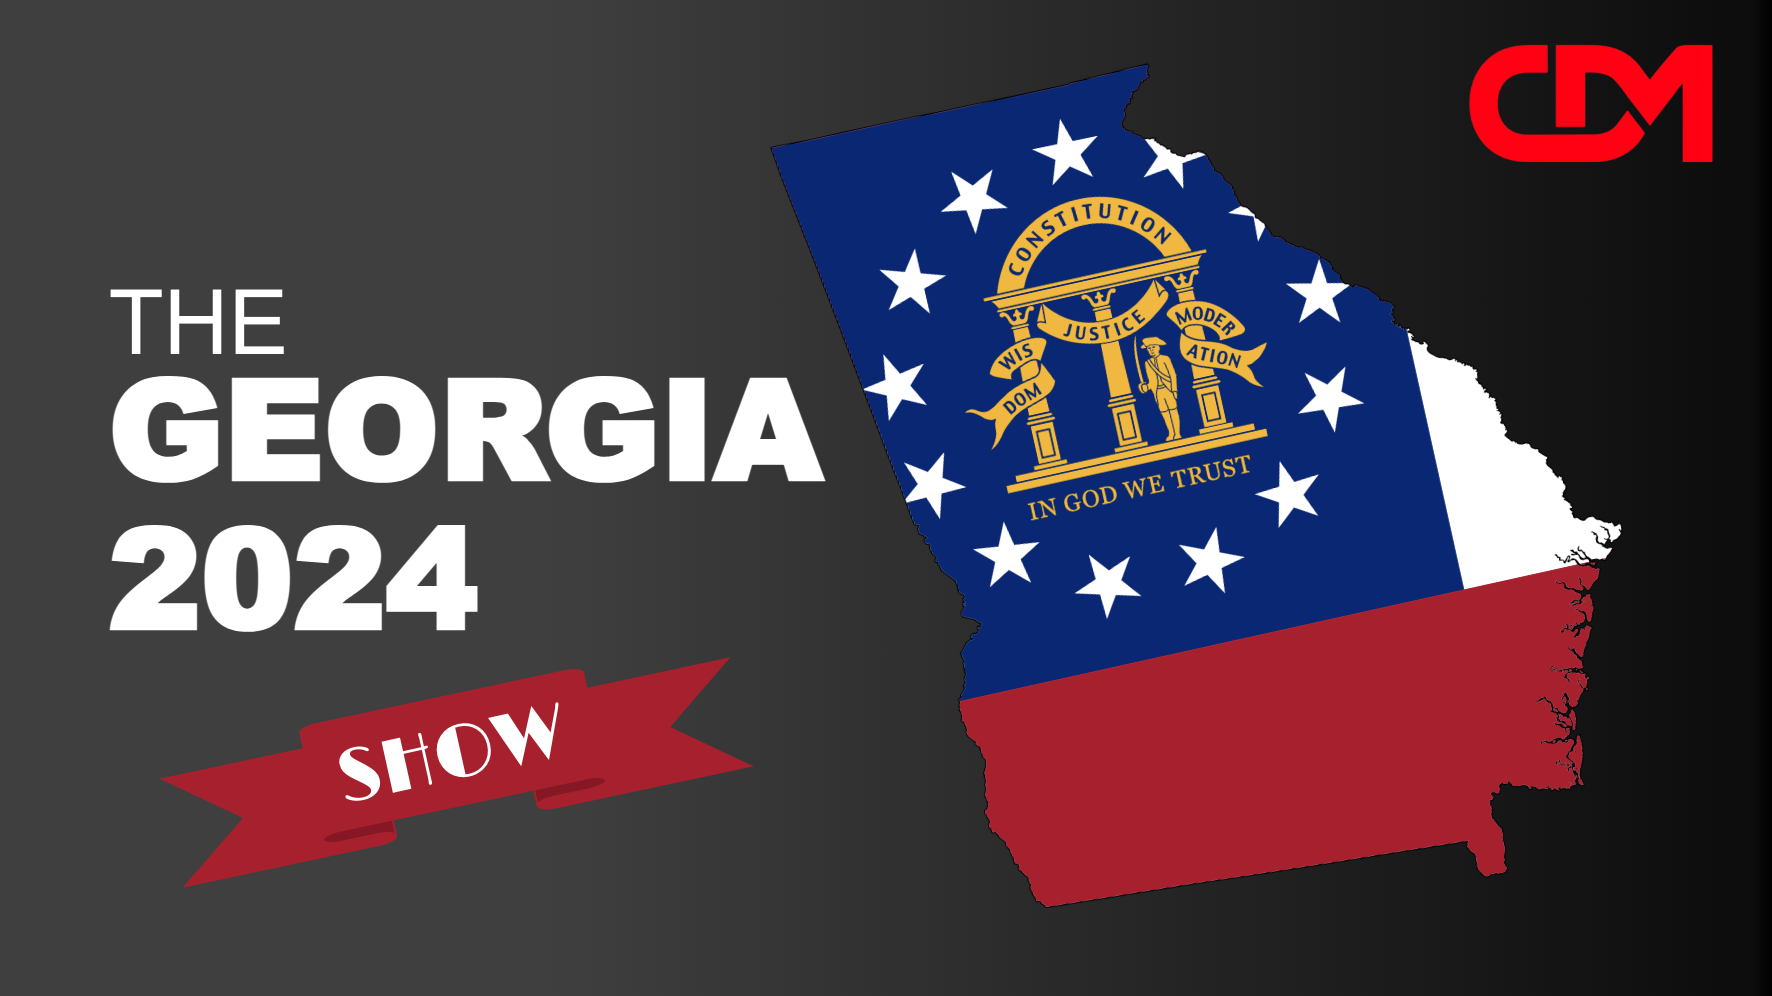 LIVESTREAM Sunday 2:00pm - The Georgia 2024 Show! With David Clements, Chris Gleason, Nate Cain